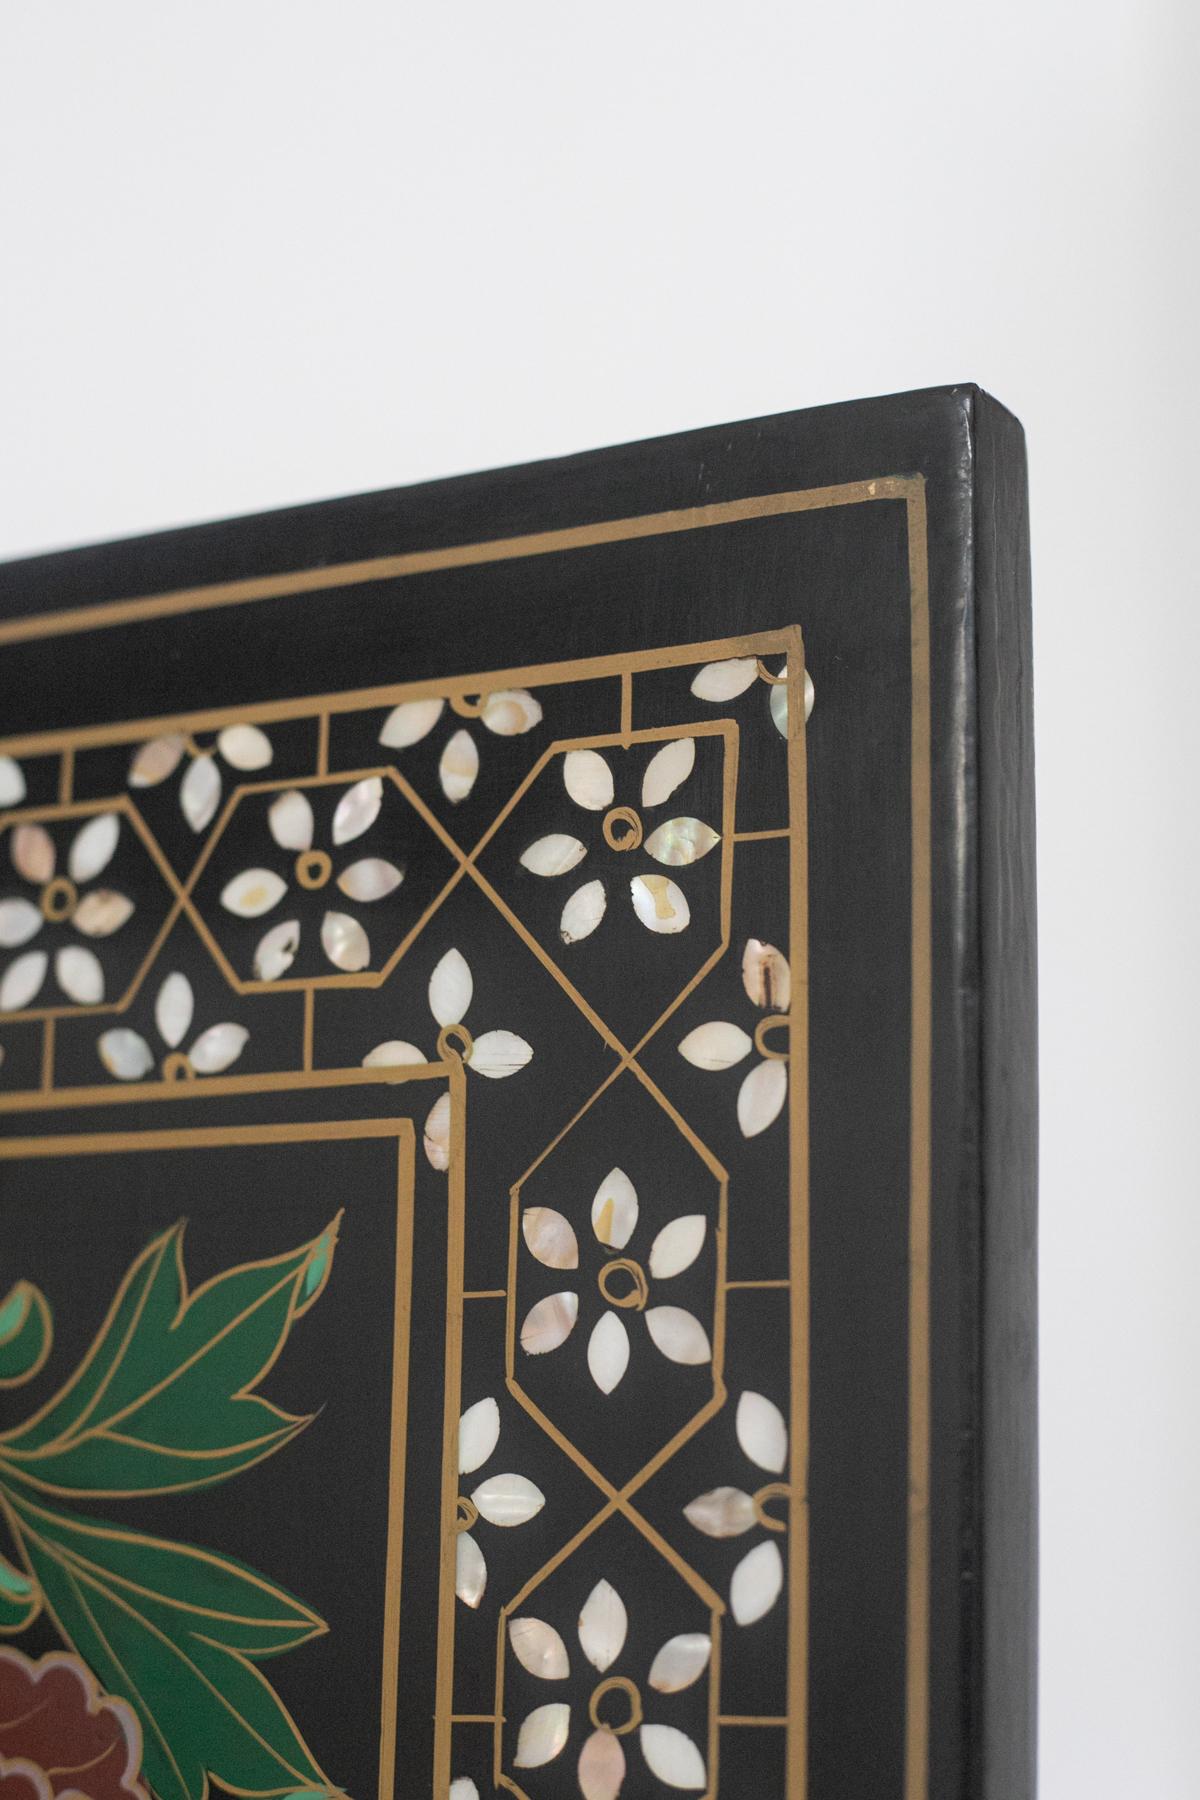 Rare and beautiful Chinese wooden screen belonging to the 20th century, fine French manufacture.
The screen is made entirely of dark lacquered wood, composed of 6 panels that can be modulated to your liking.
The screen is supported by 12